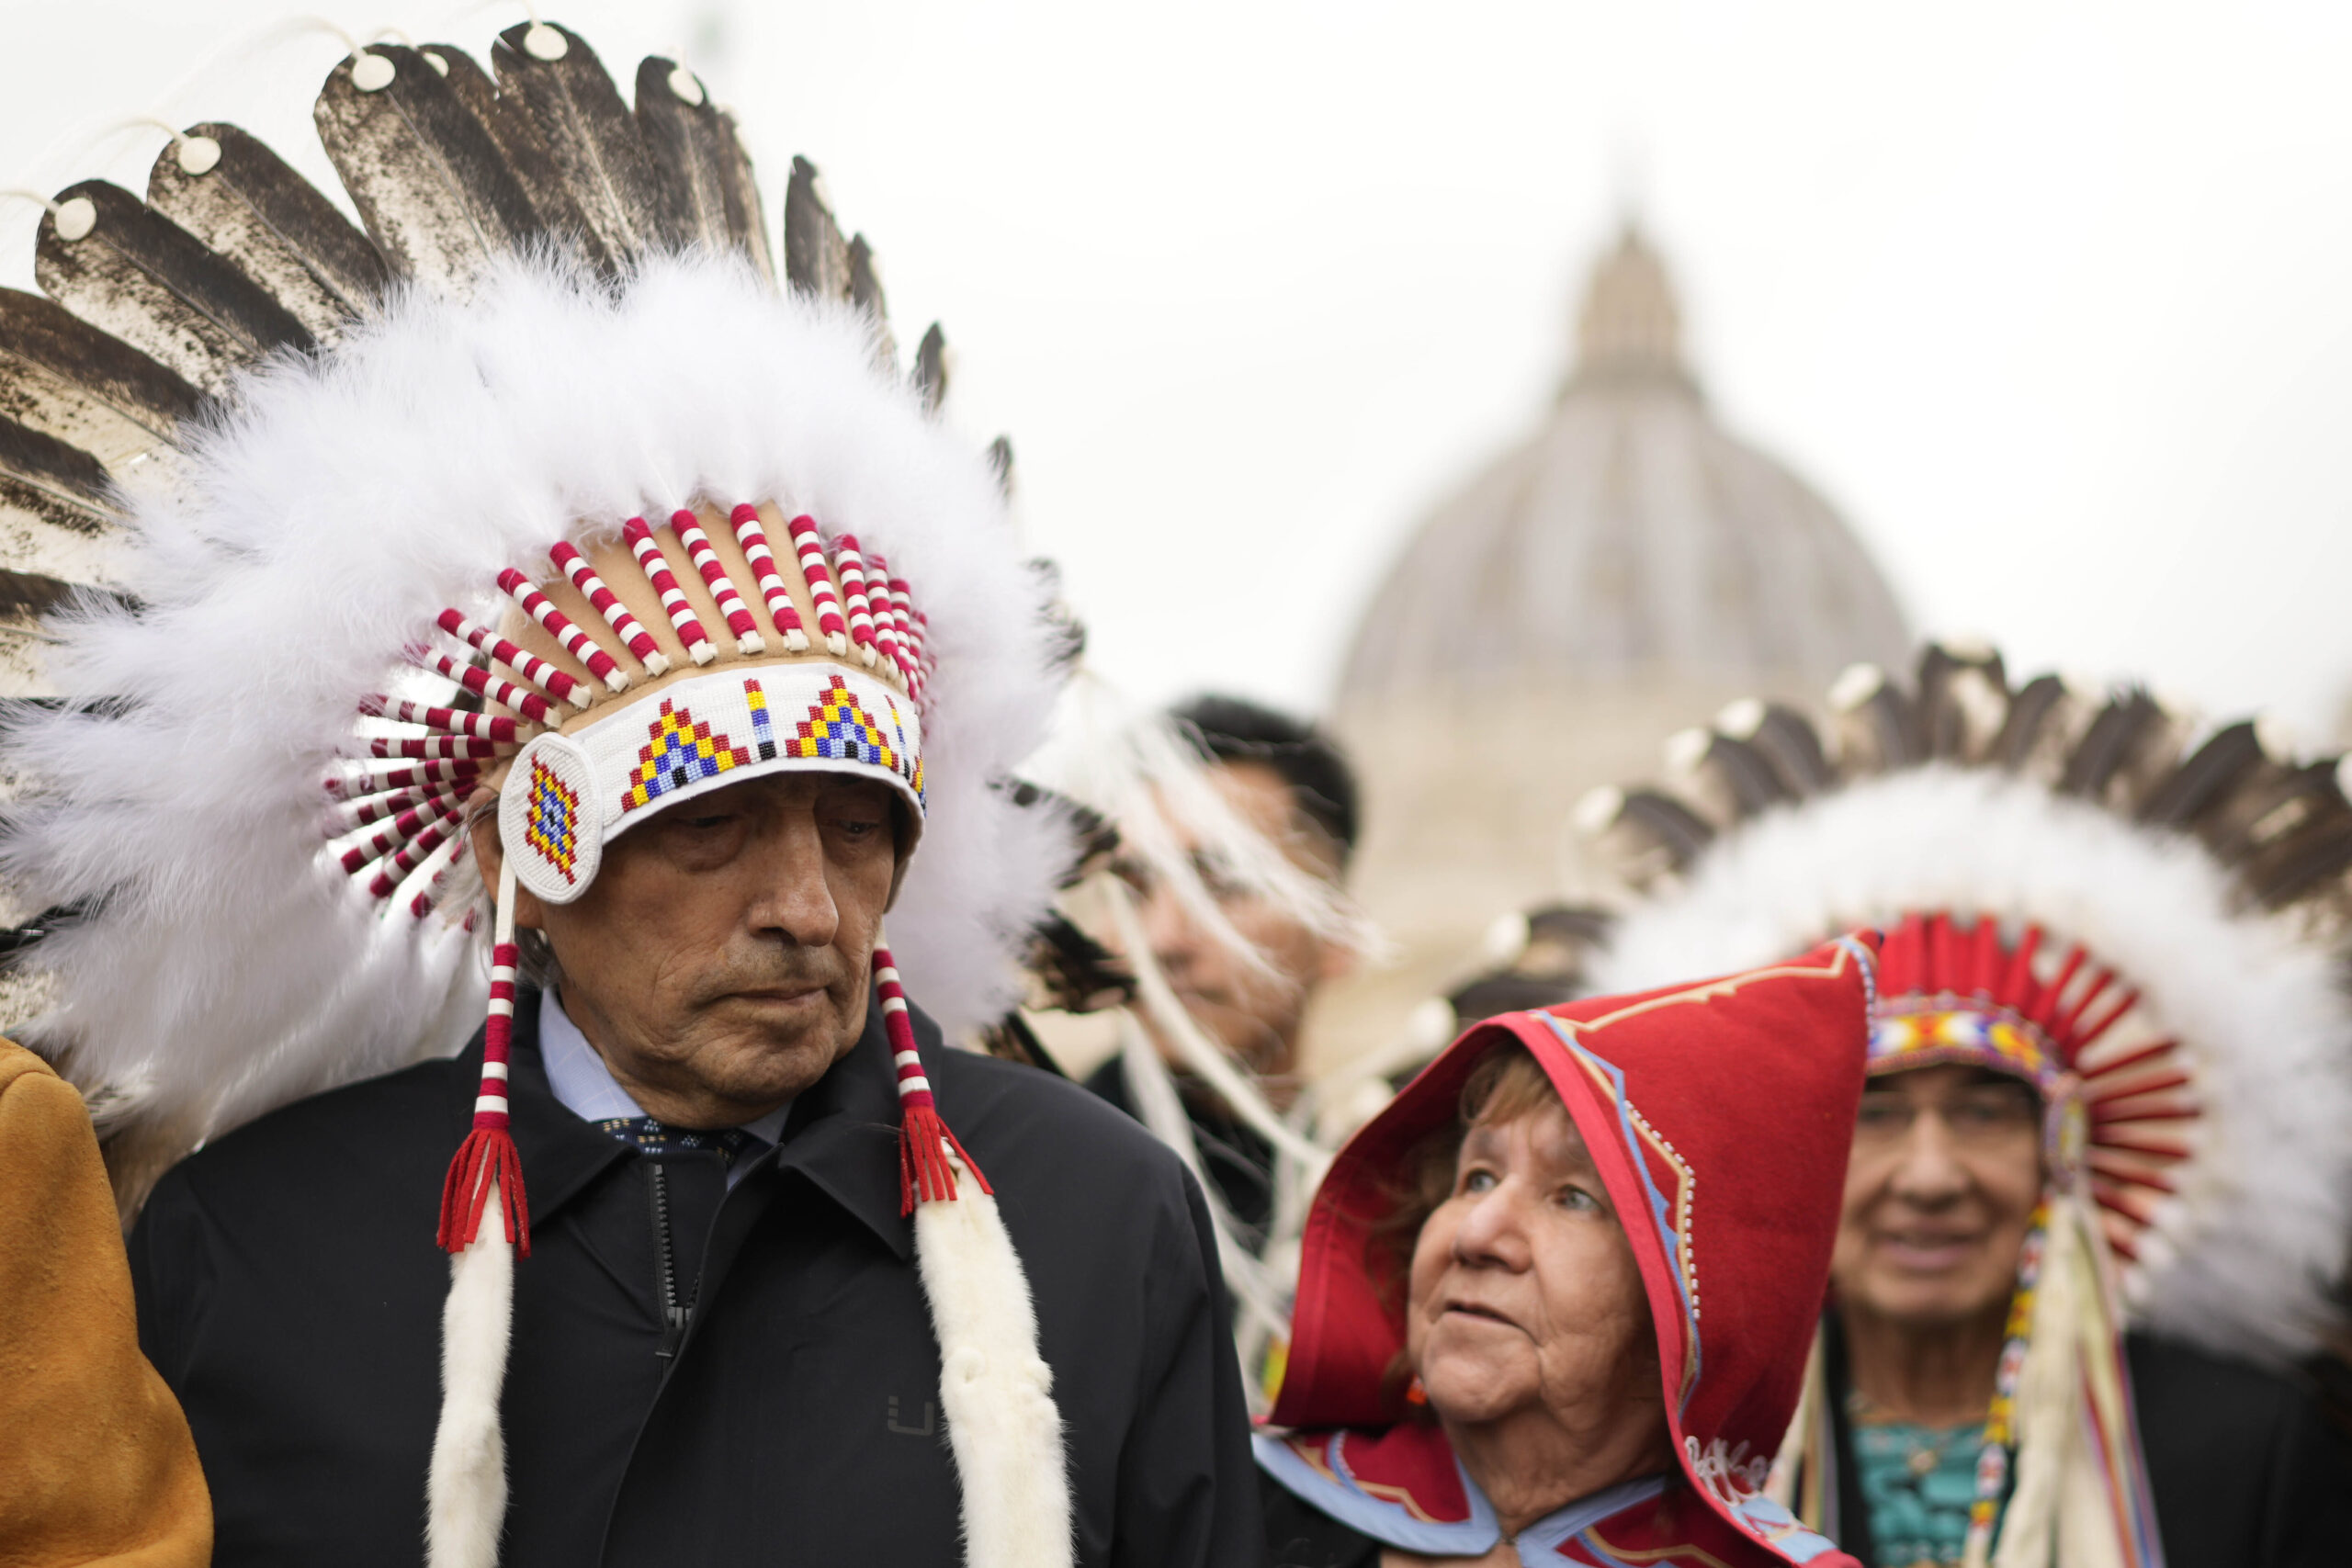 Former national chief of the Assembly of First Nations, Phil Fontaine, left, stands outside St. Peter's Square at the end of a meeting with Pope Francis at the Vatican, Thursday, March 31, 2022. (AP Photo/Andrew Medichini)